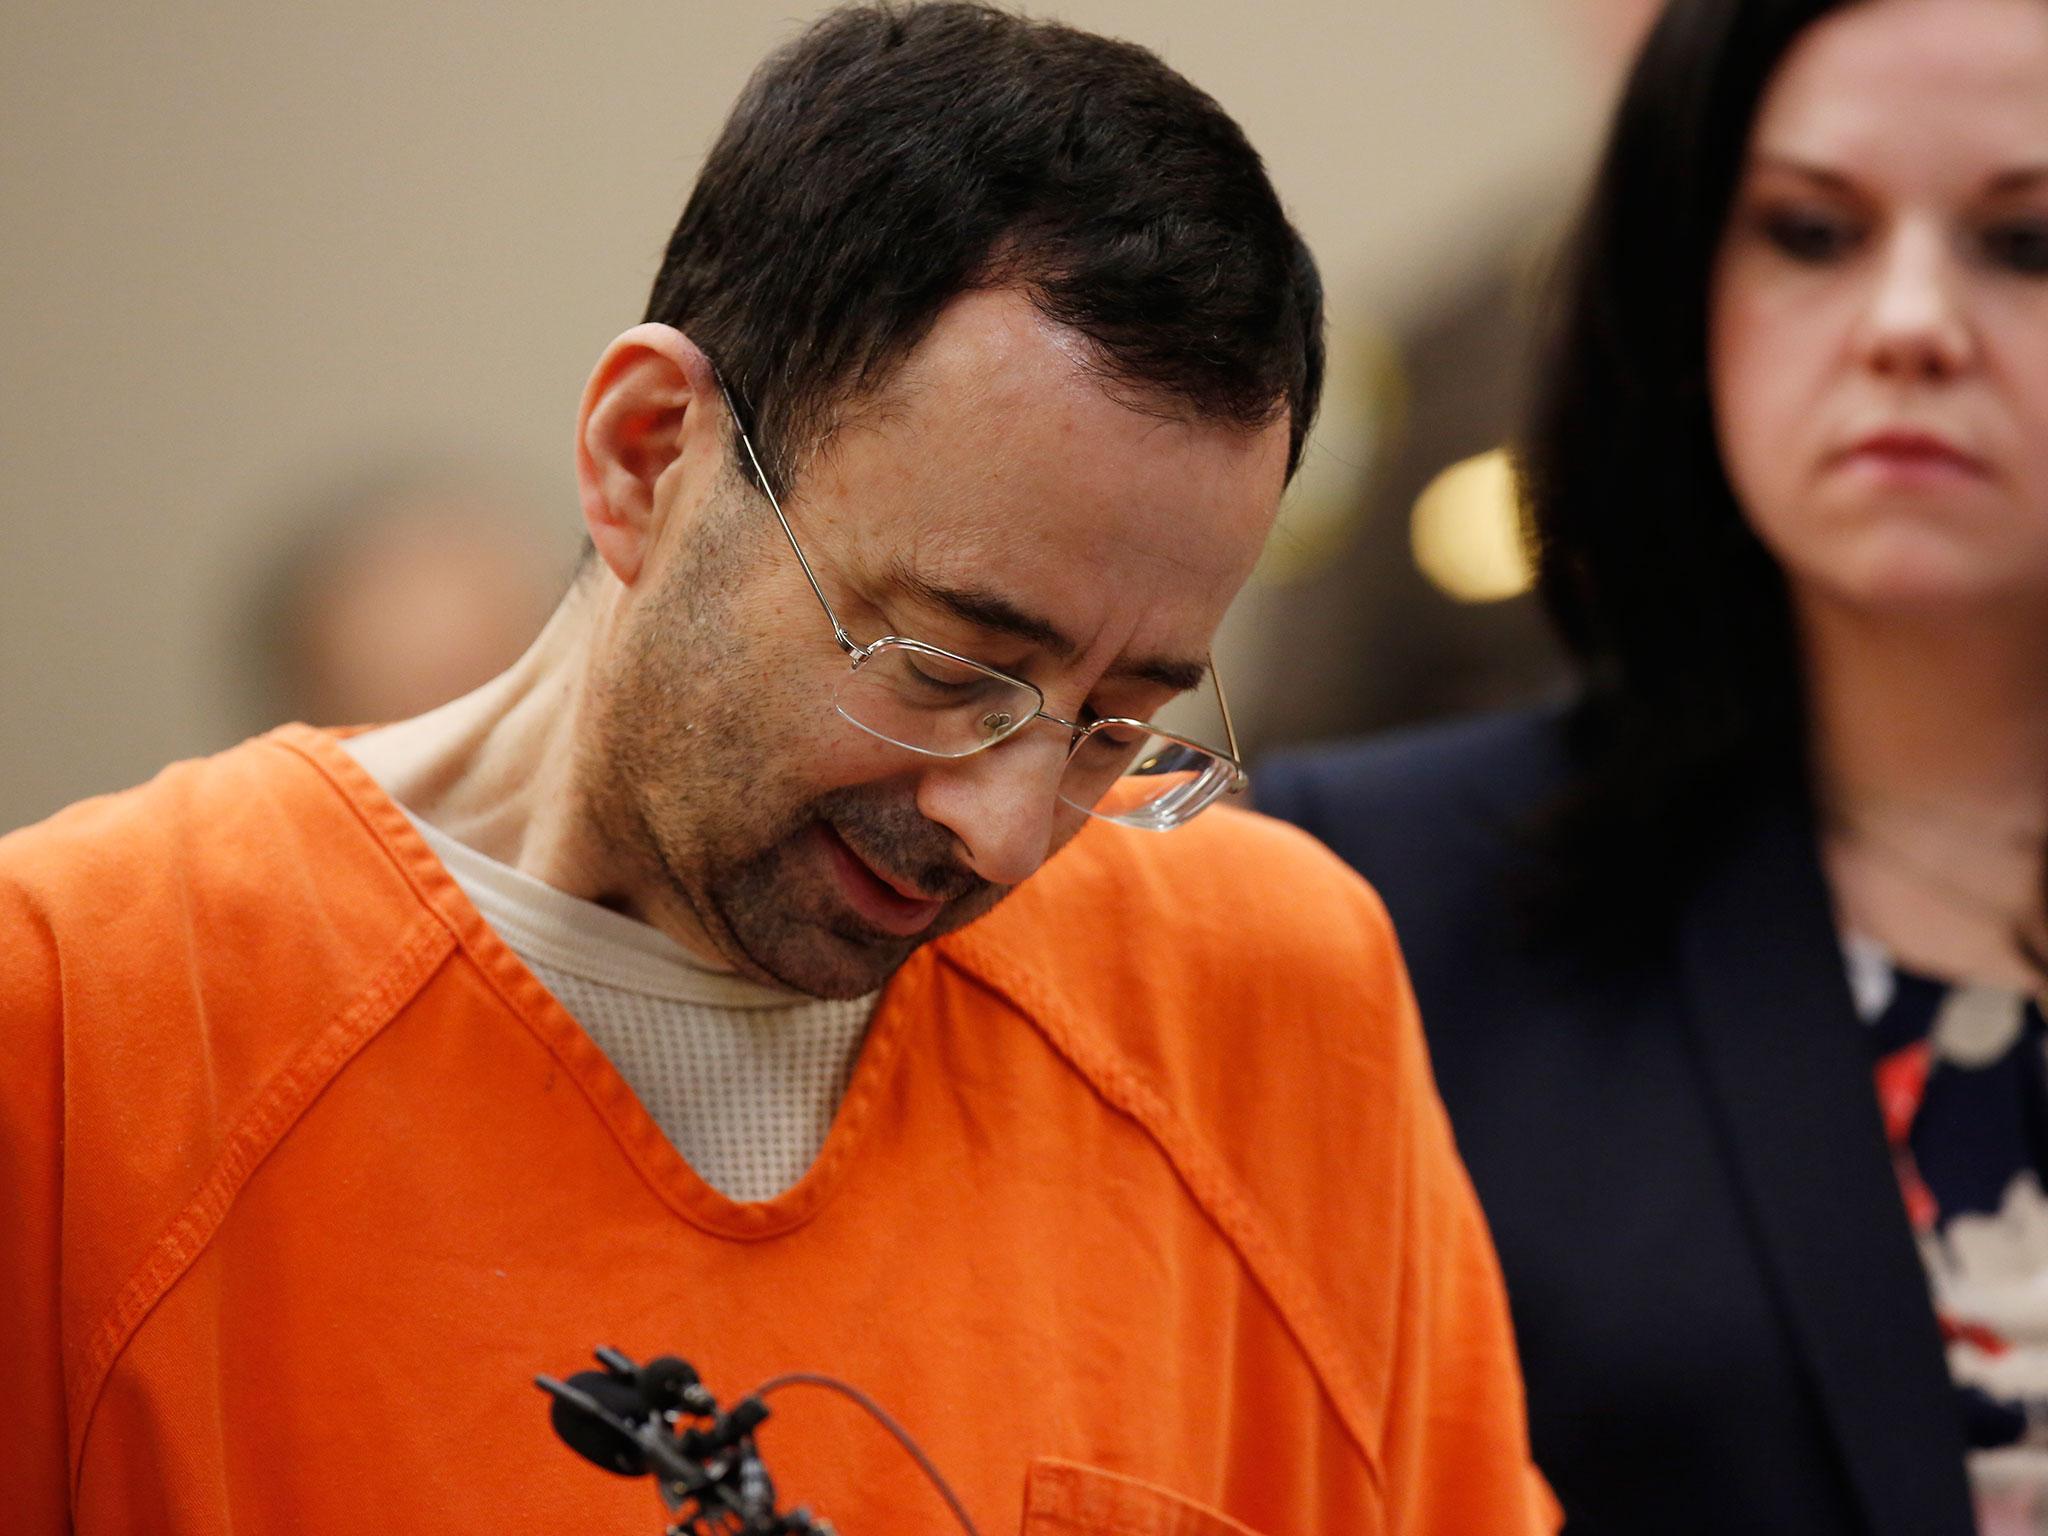 Larry Nassar bowed his head with his eyes closed or looked away as the victims delivered their impact statements